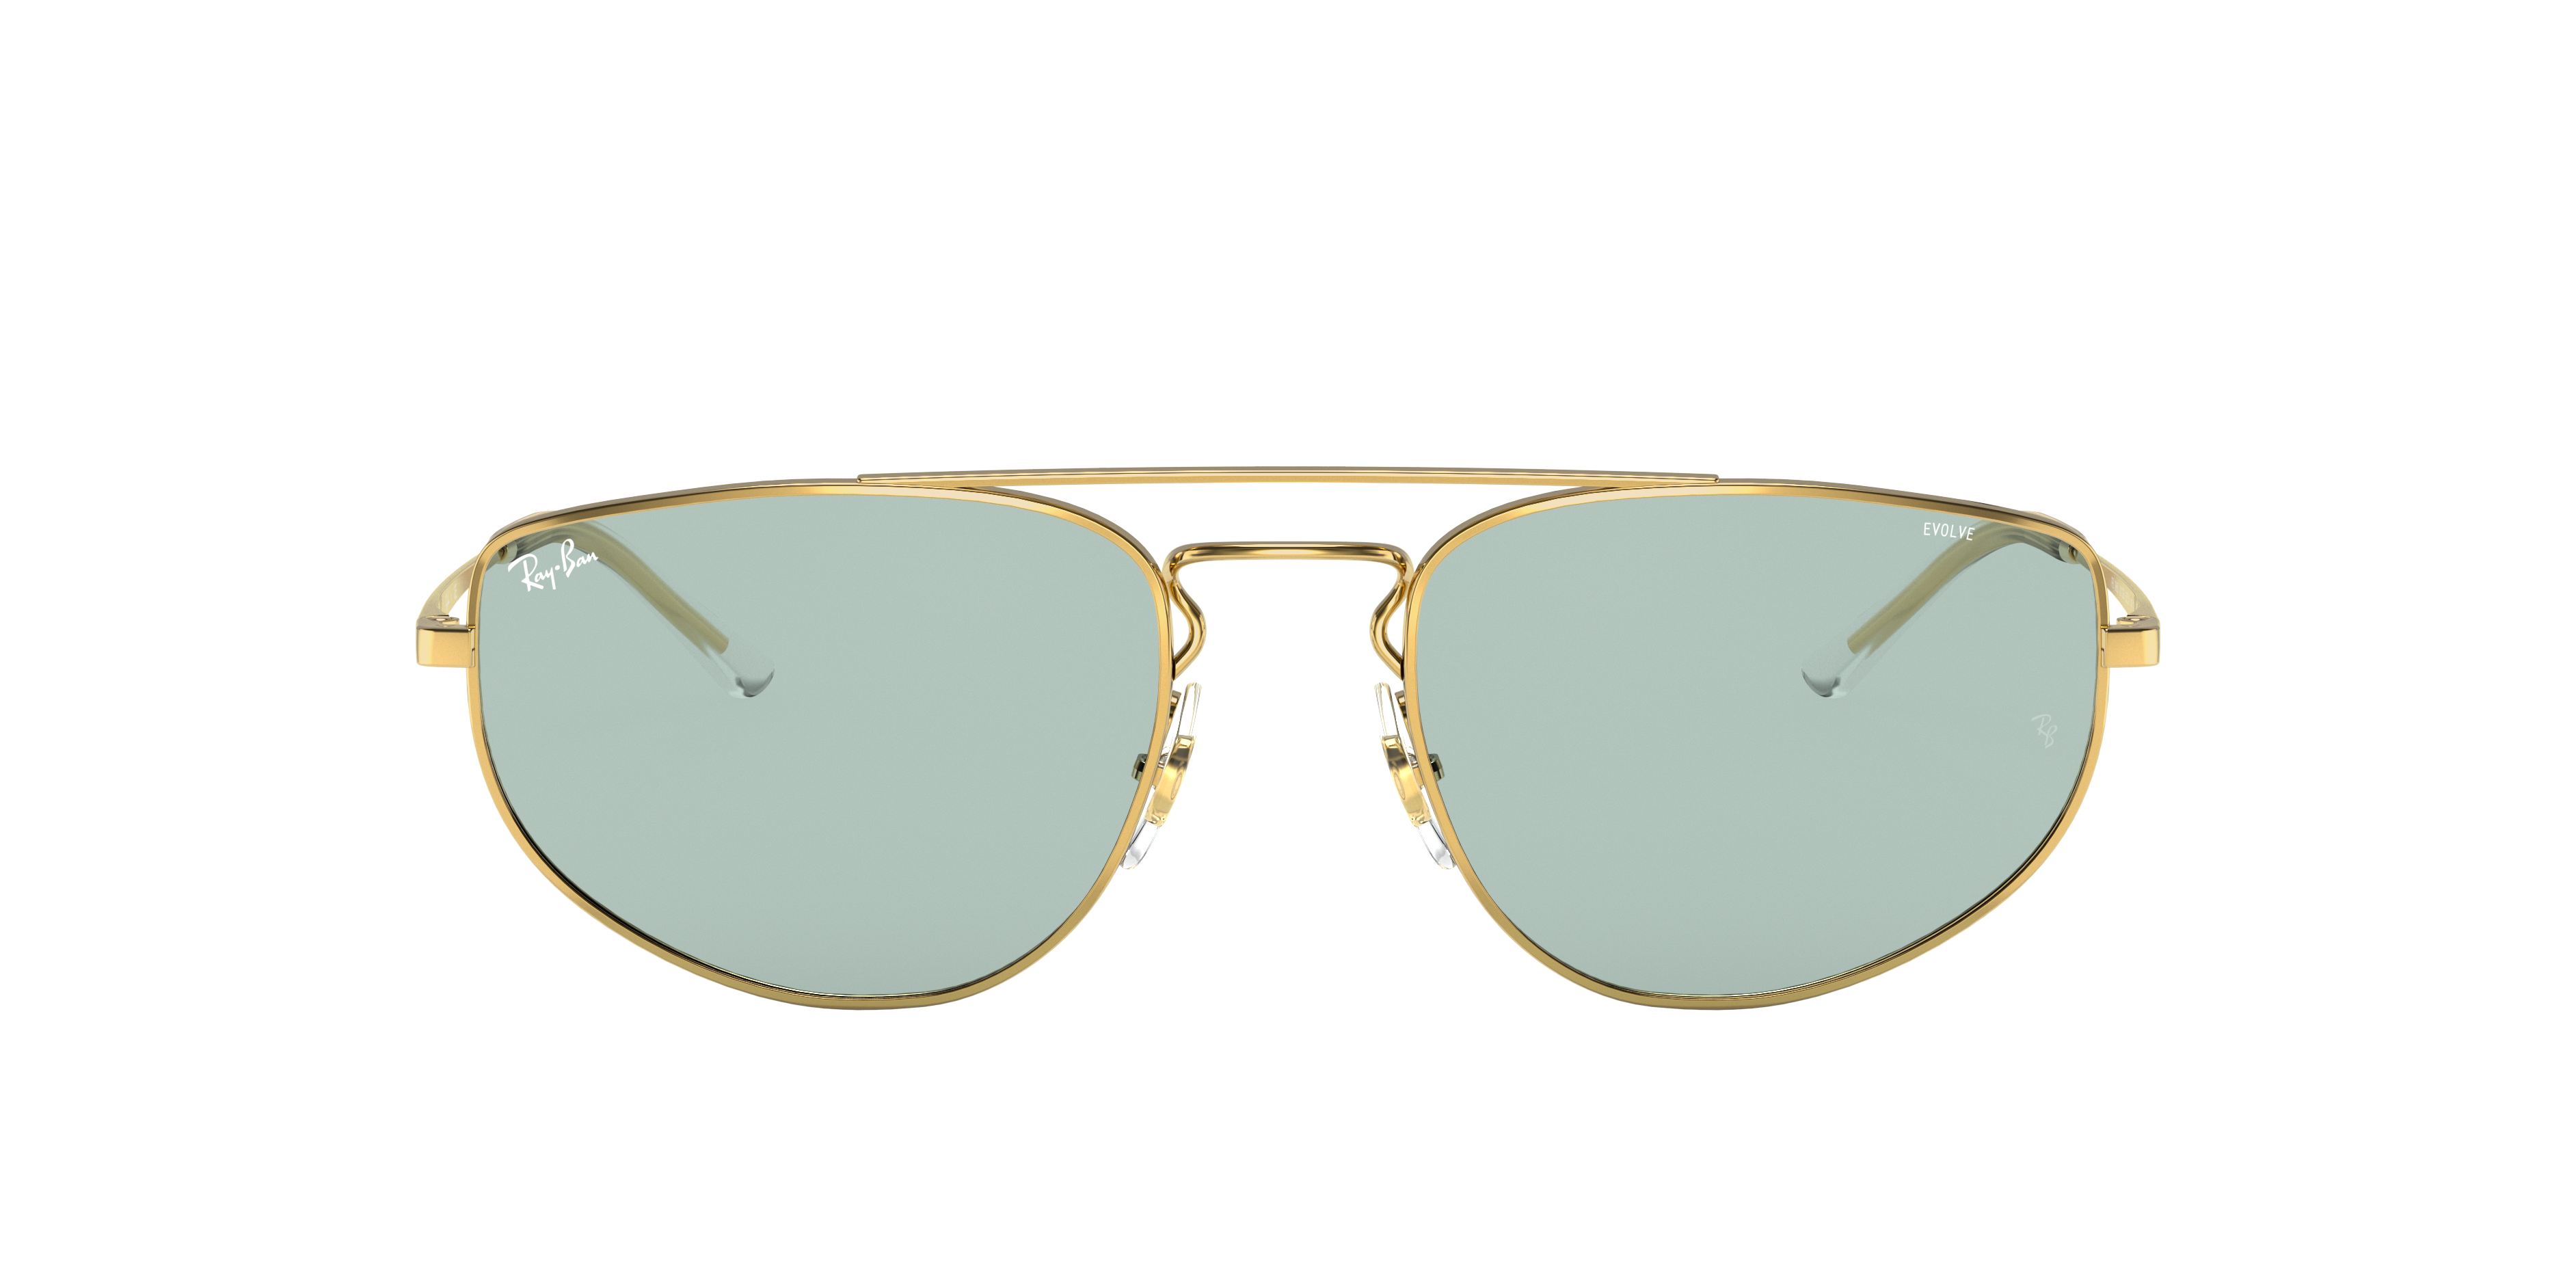 ray ban sunglasses new arrival